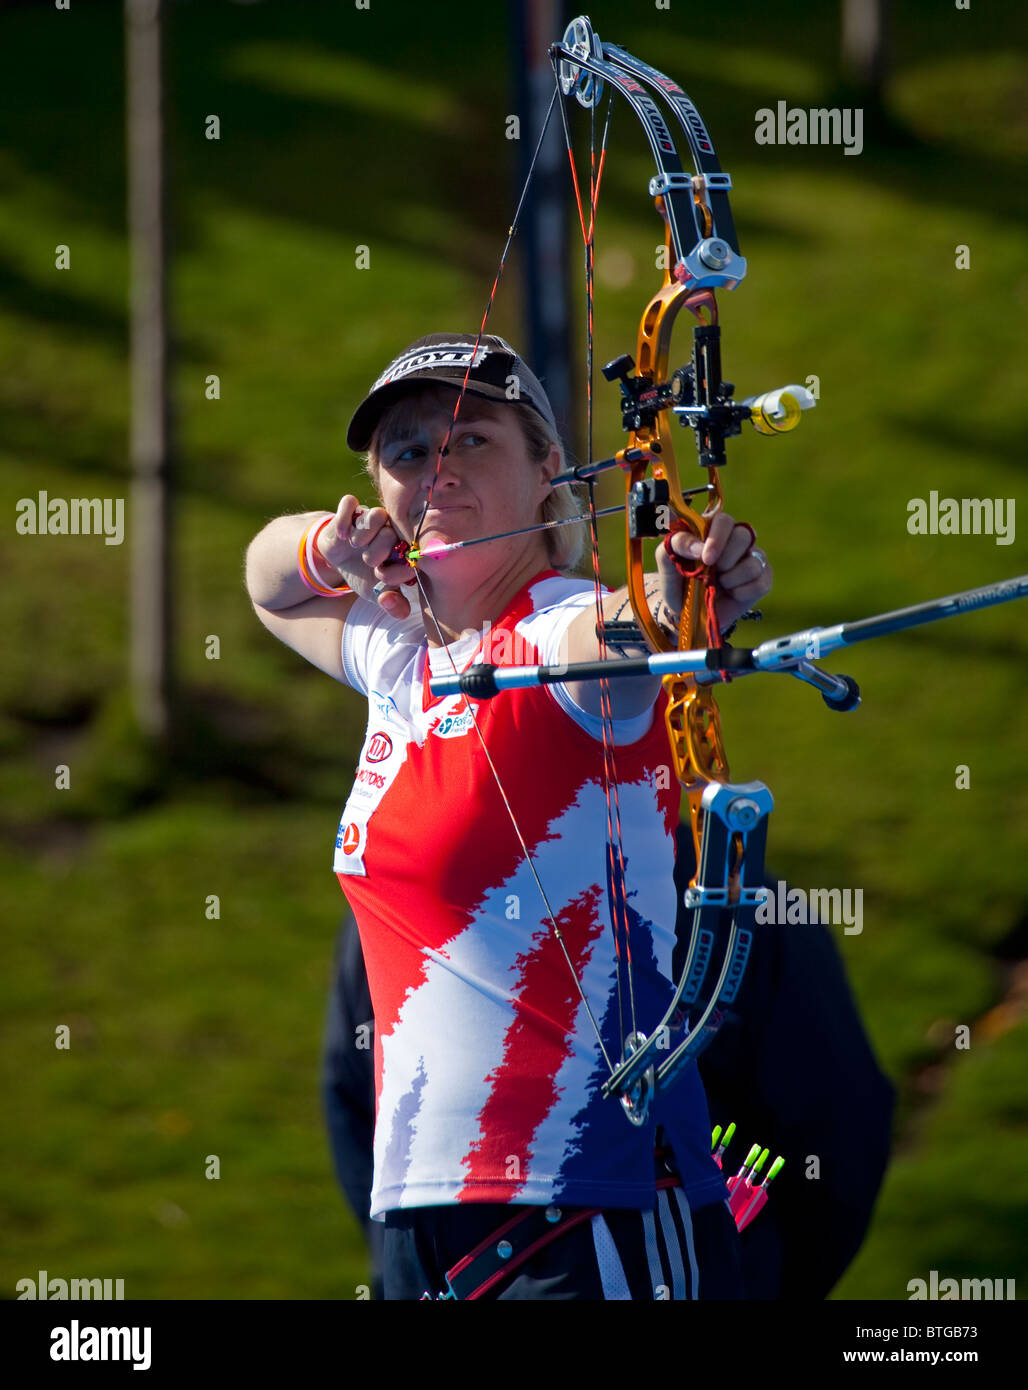 Andrea Gales  Uk Archer with Compound Bow, Archery World Cup event, Edinburgh, Scotland UK, Europe Stock Photo